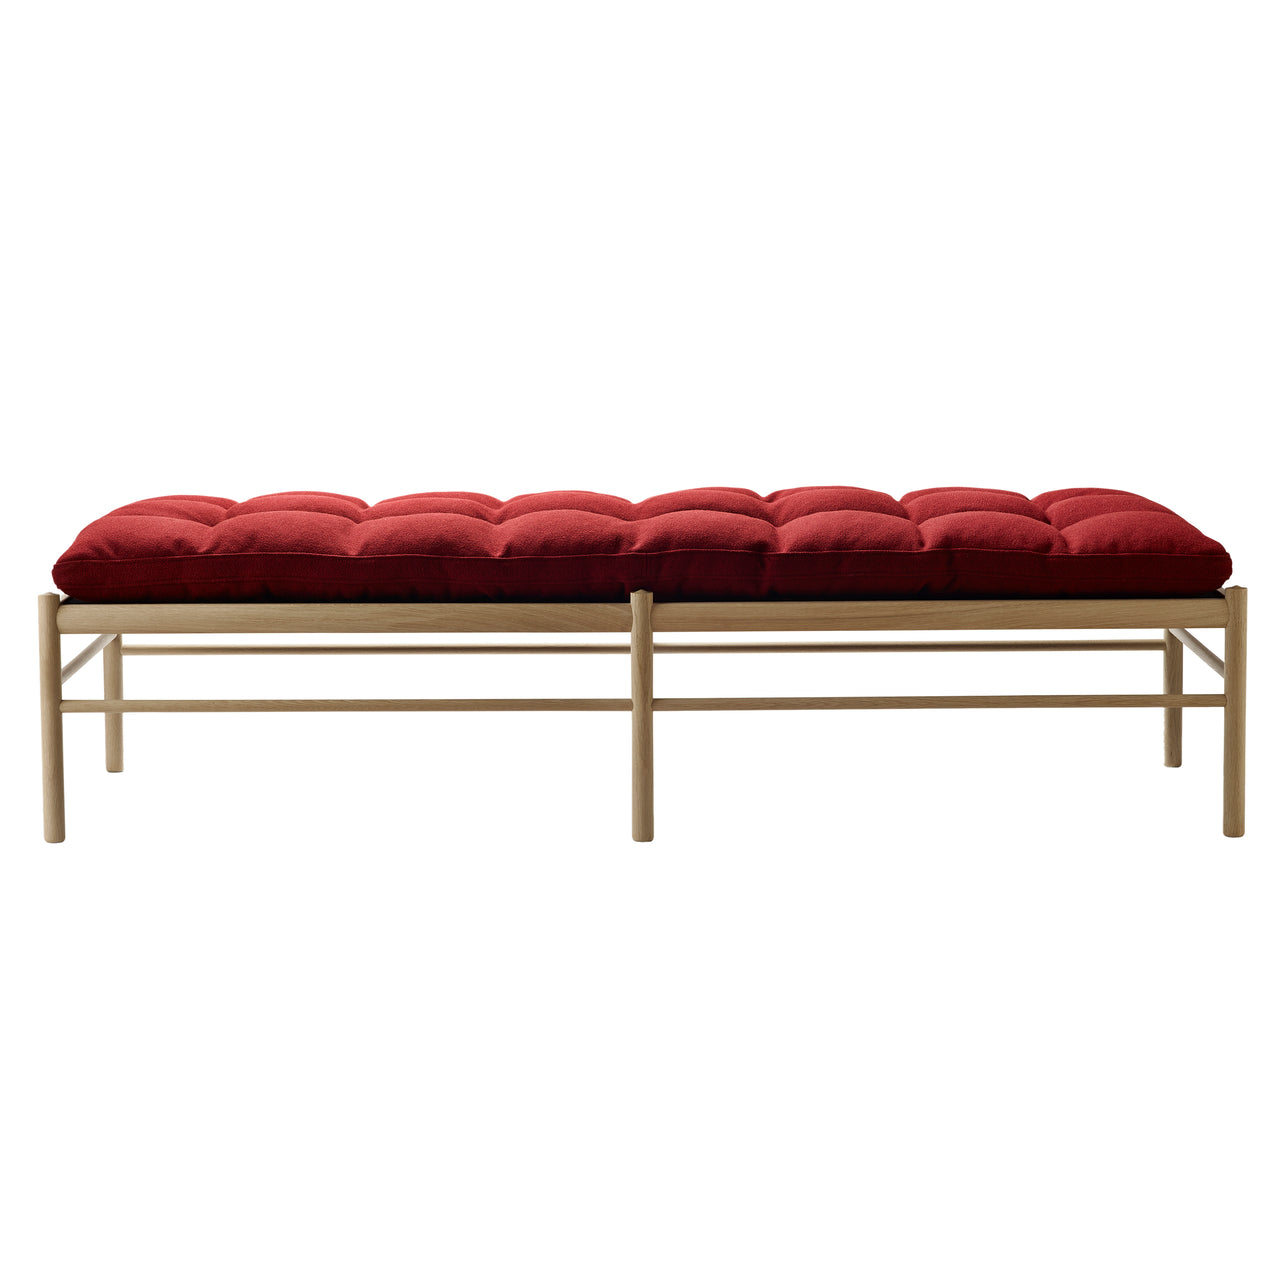 OW150 Daybed: Soaped Oak + Without Neck Pillow